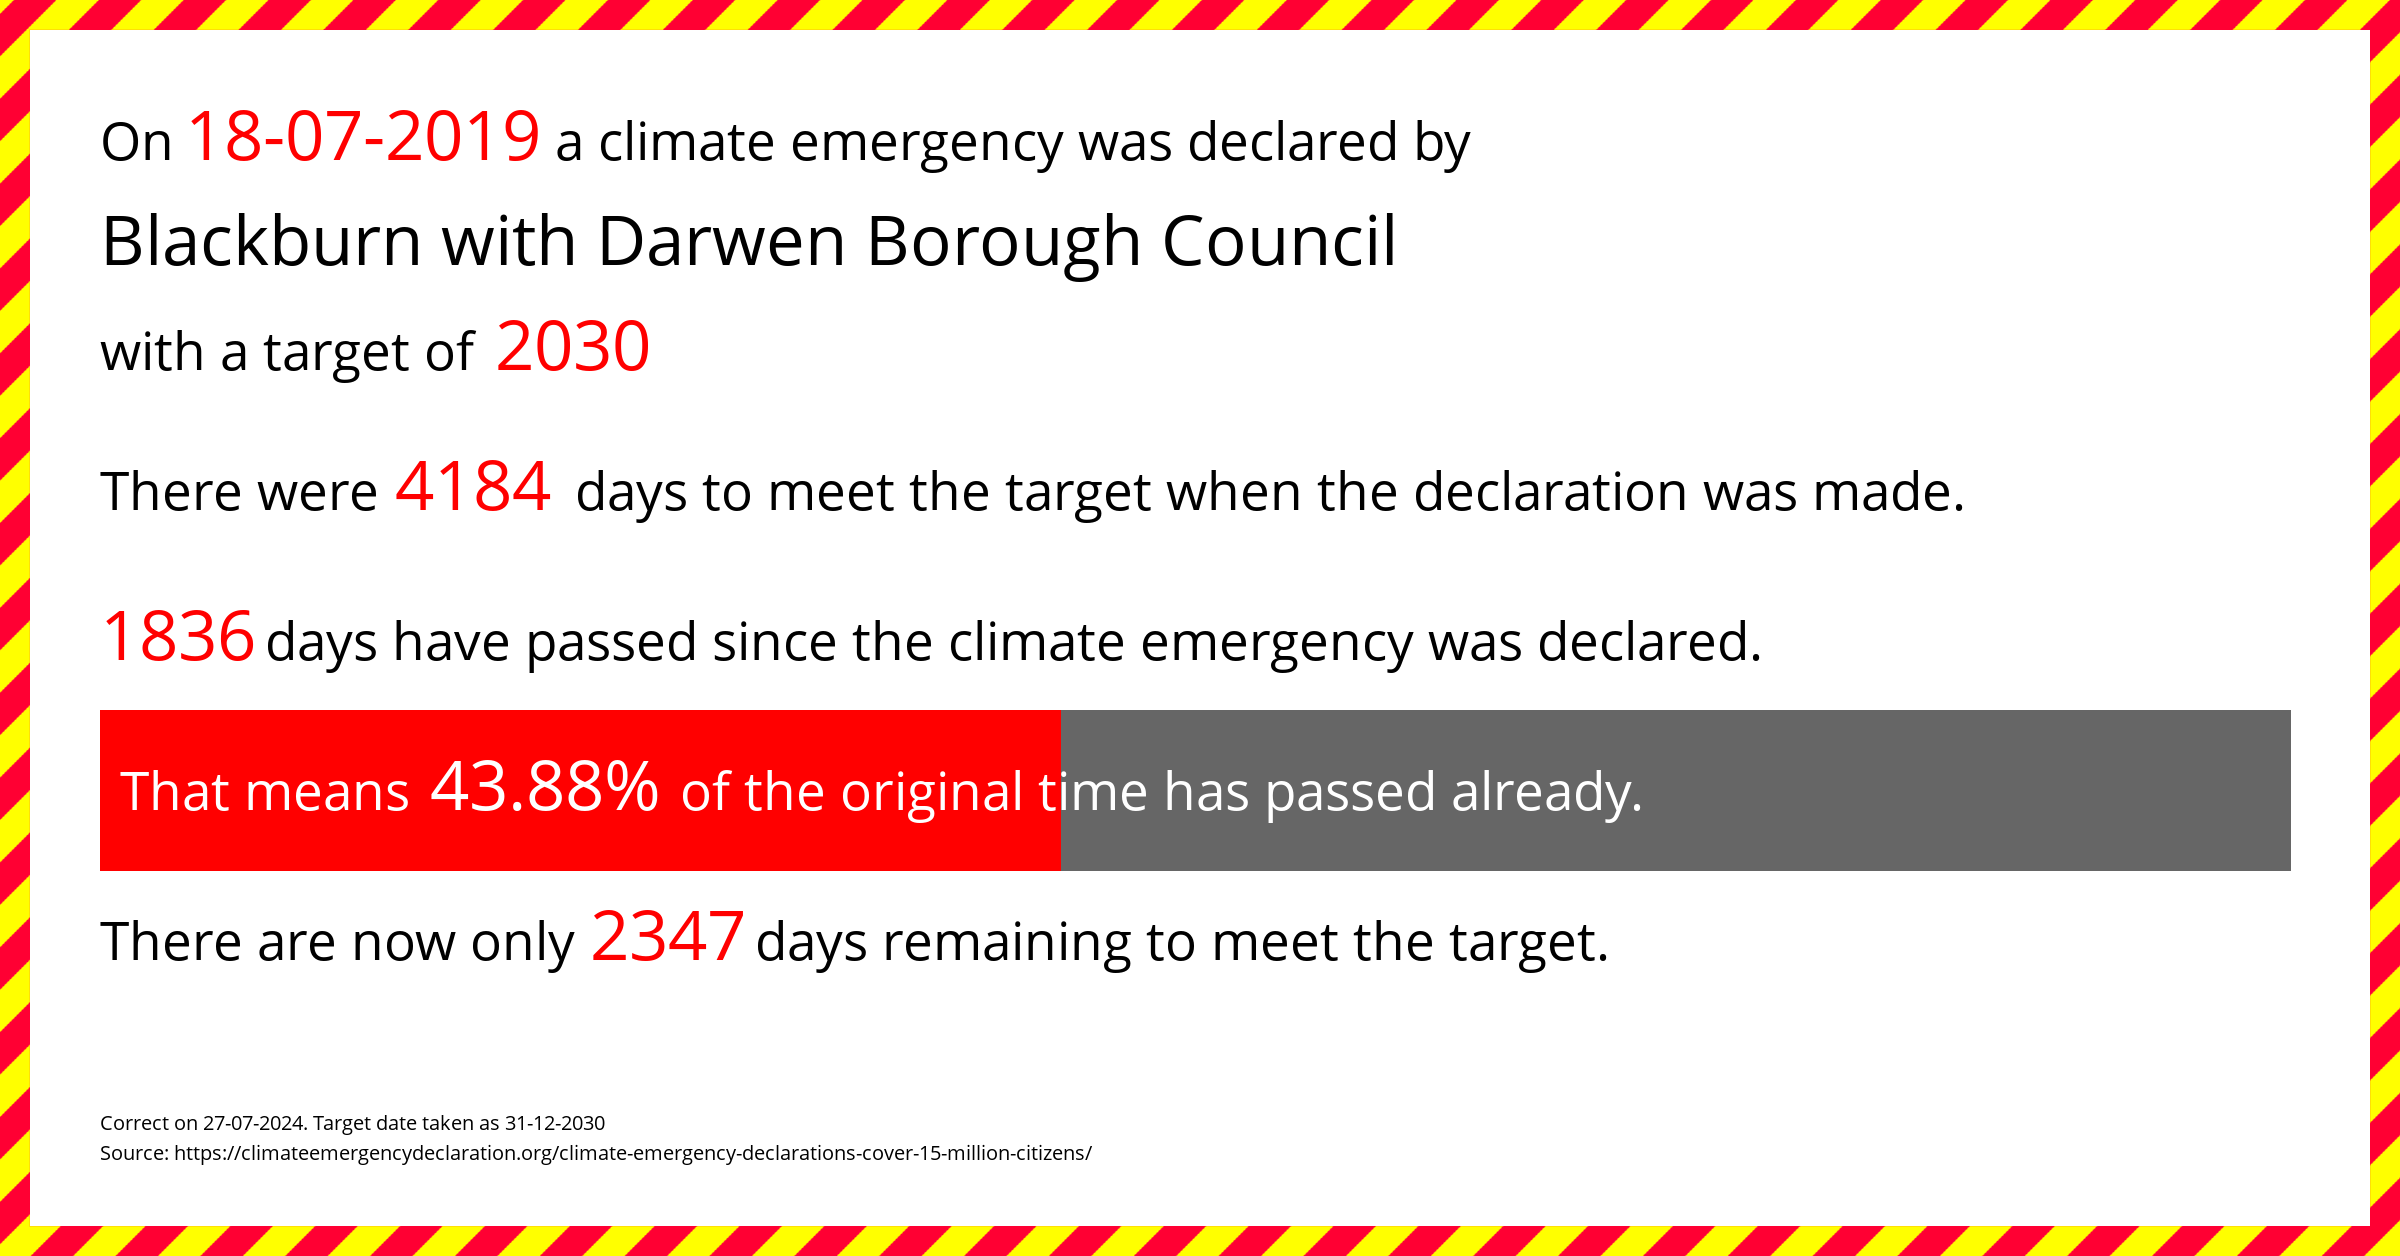 Blackburn with Darwen Borough Council declared a Climate emergency on Thursday 18th July 2019, with a target of 2030.